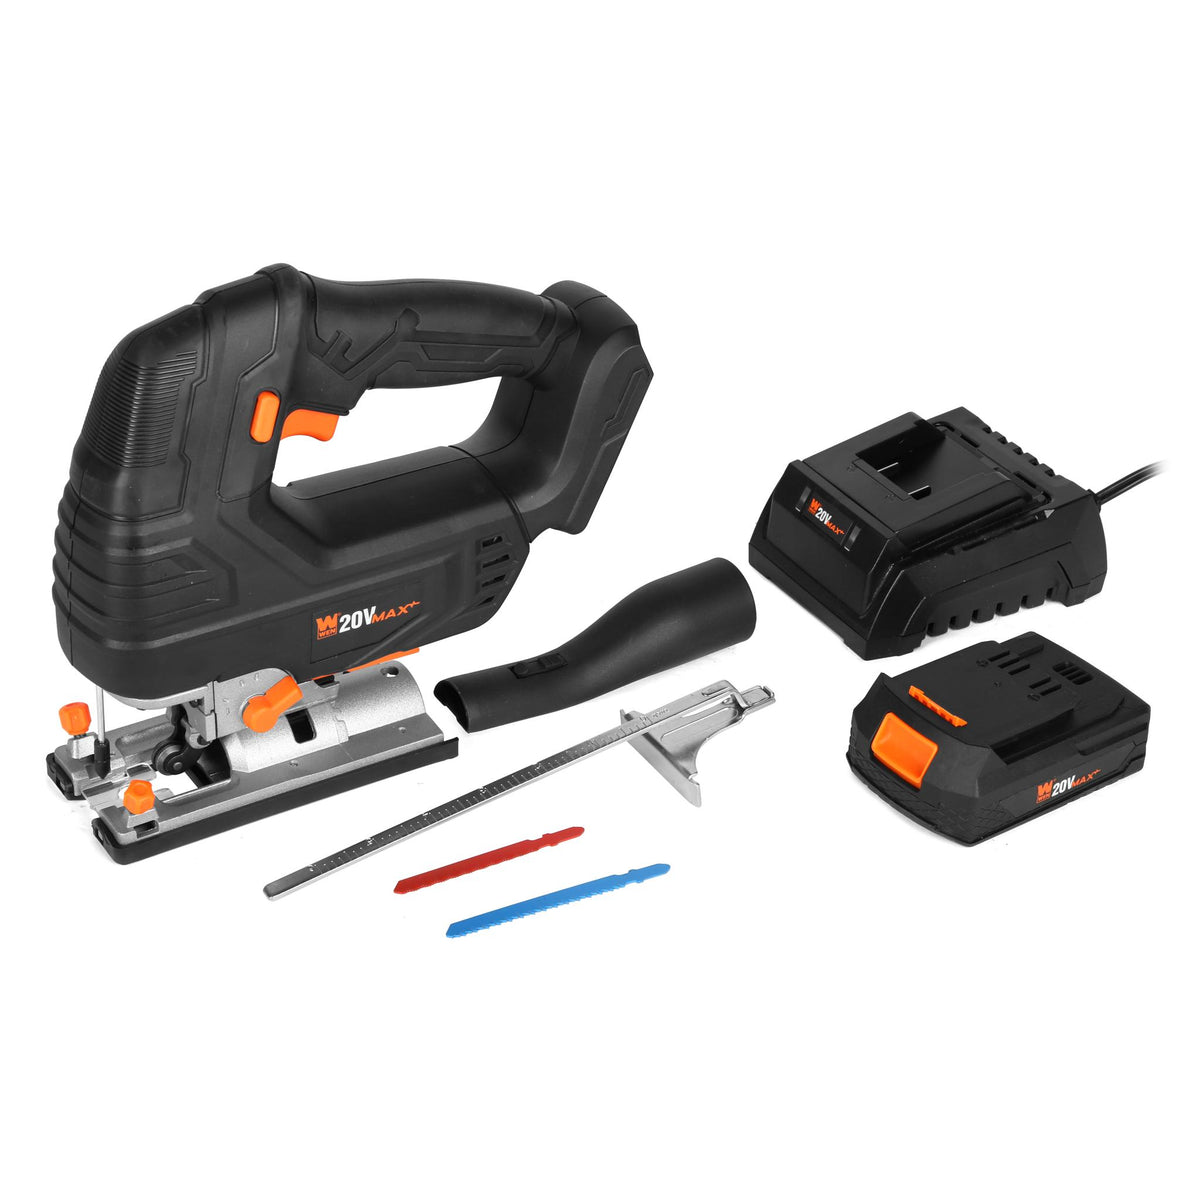 WEN 20667 20V Max Cordless Brushless Jigsaw with 4.0 Ah Lithium